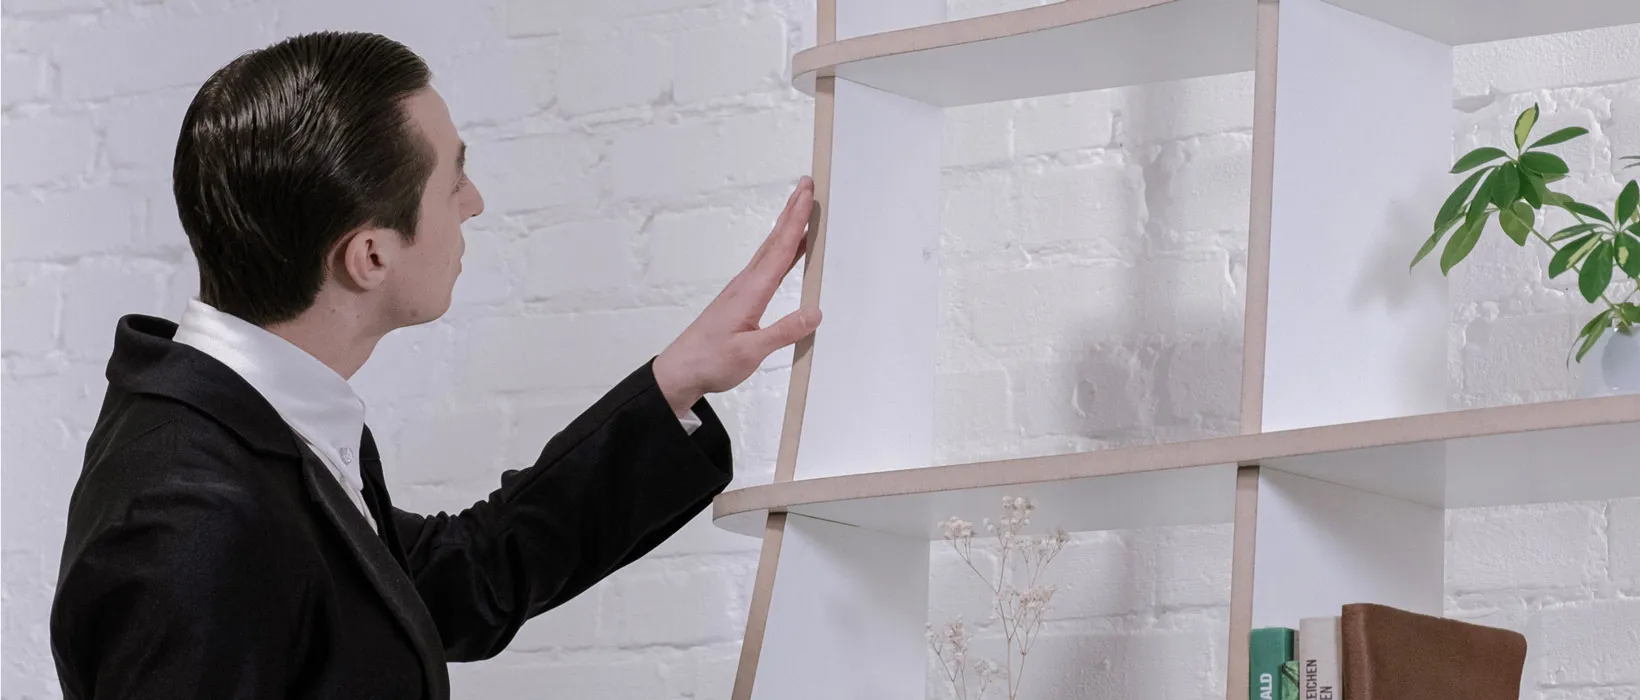 The most formable person in the world meets the most formable furniture in the world